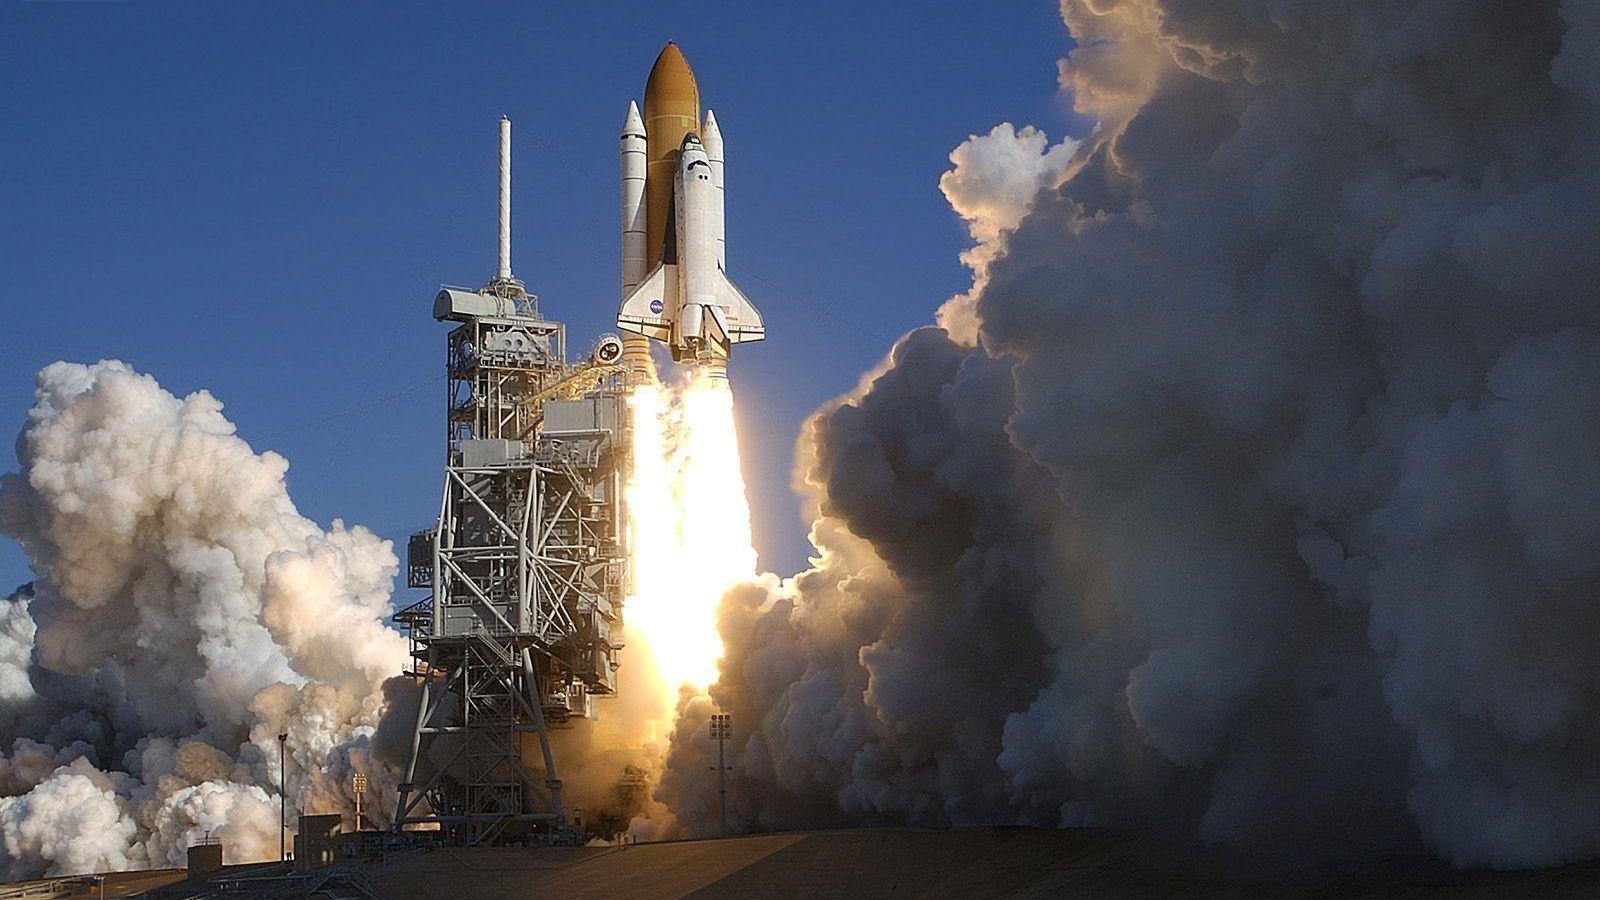 Space Shuttle Columbia Launched in 2003